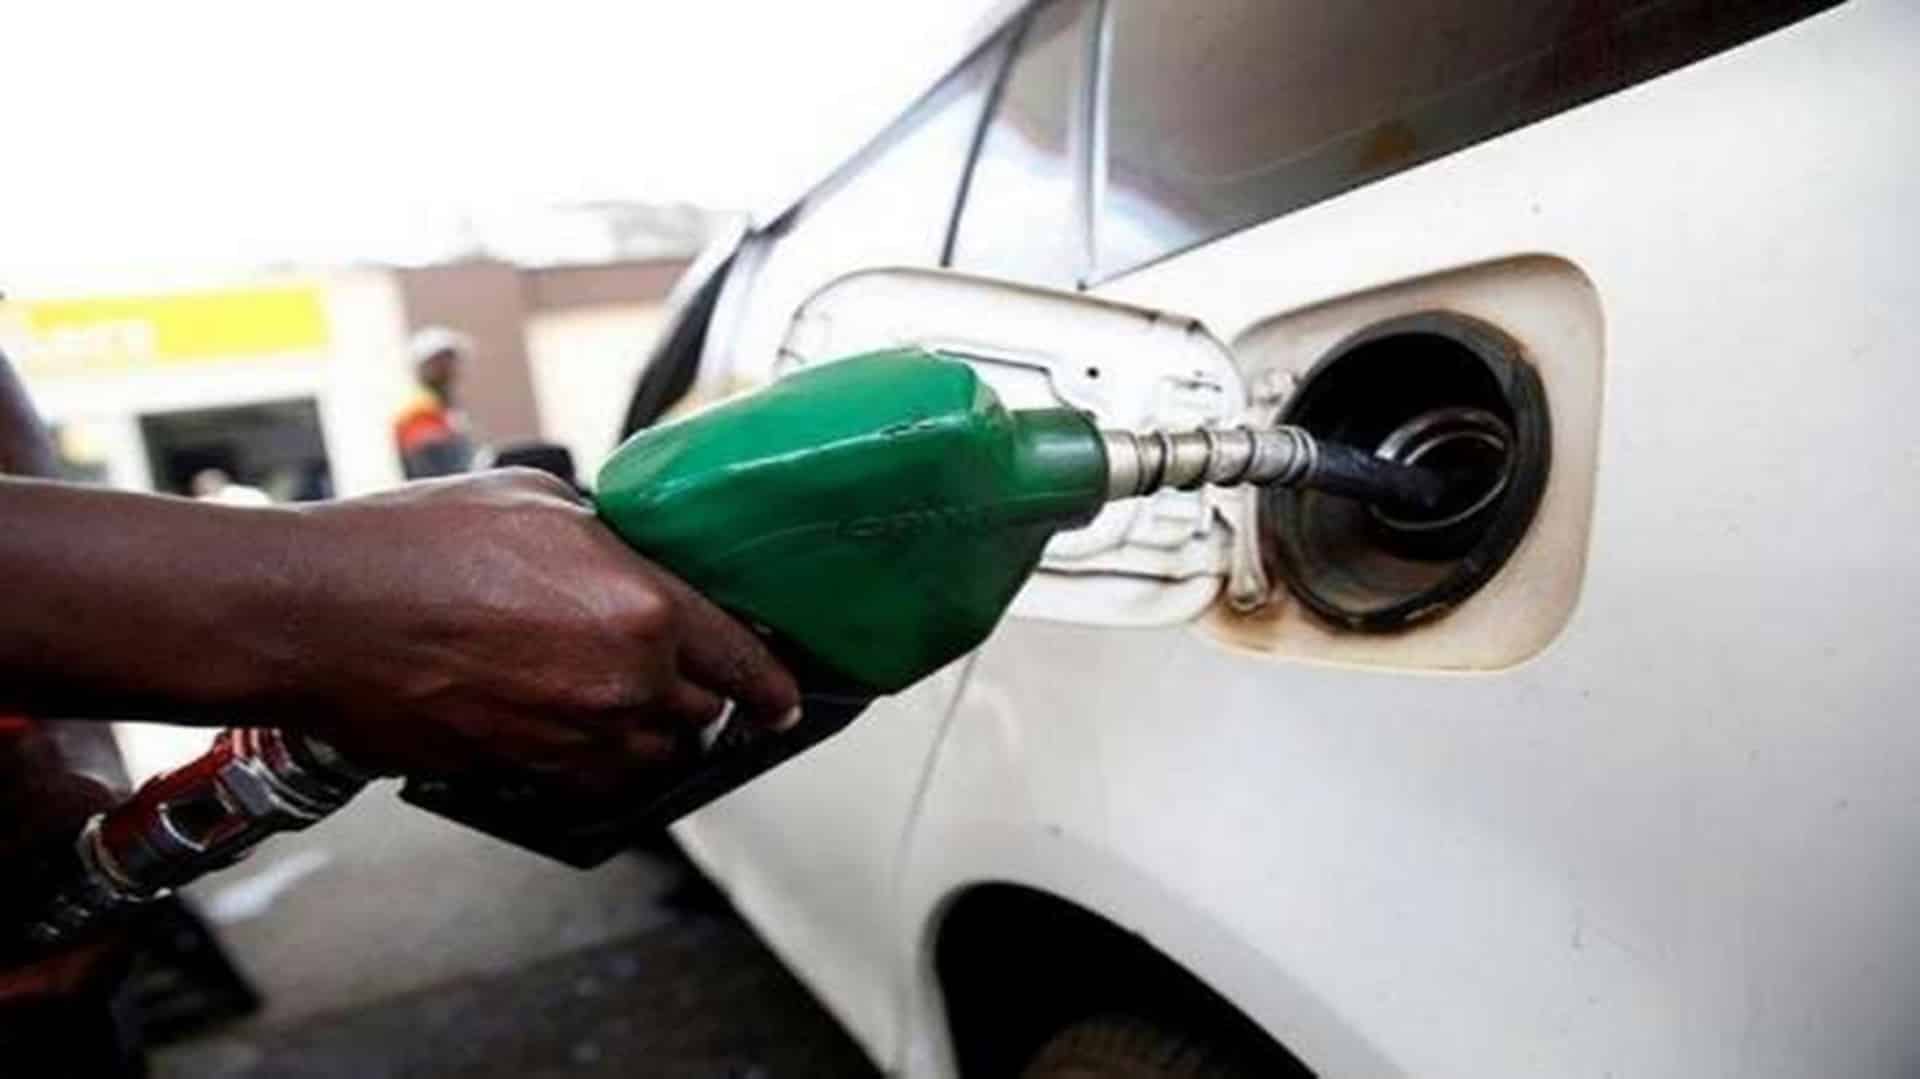 After Centre's excise duty cut, several states slash VAT on petrol and diesel. Check details